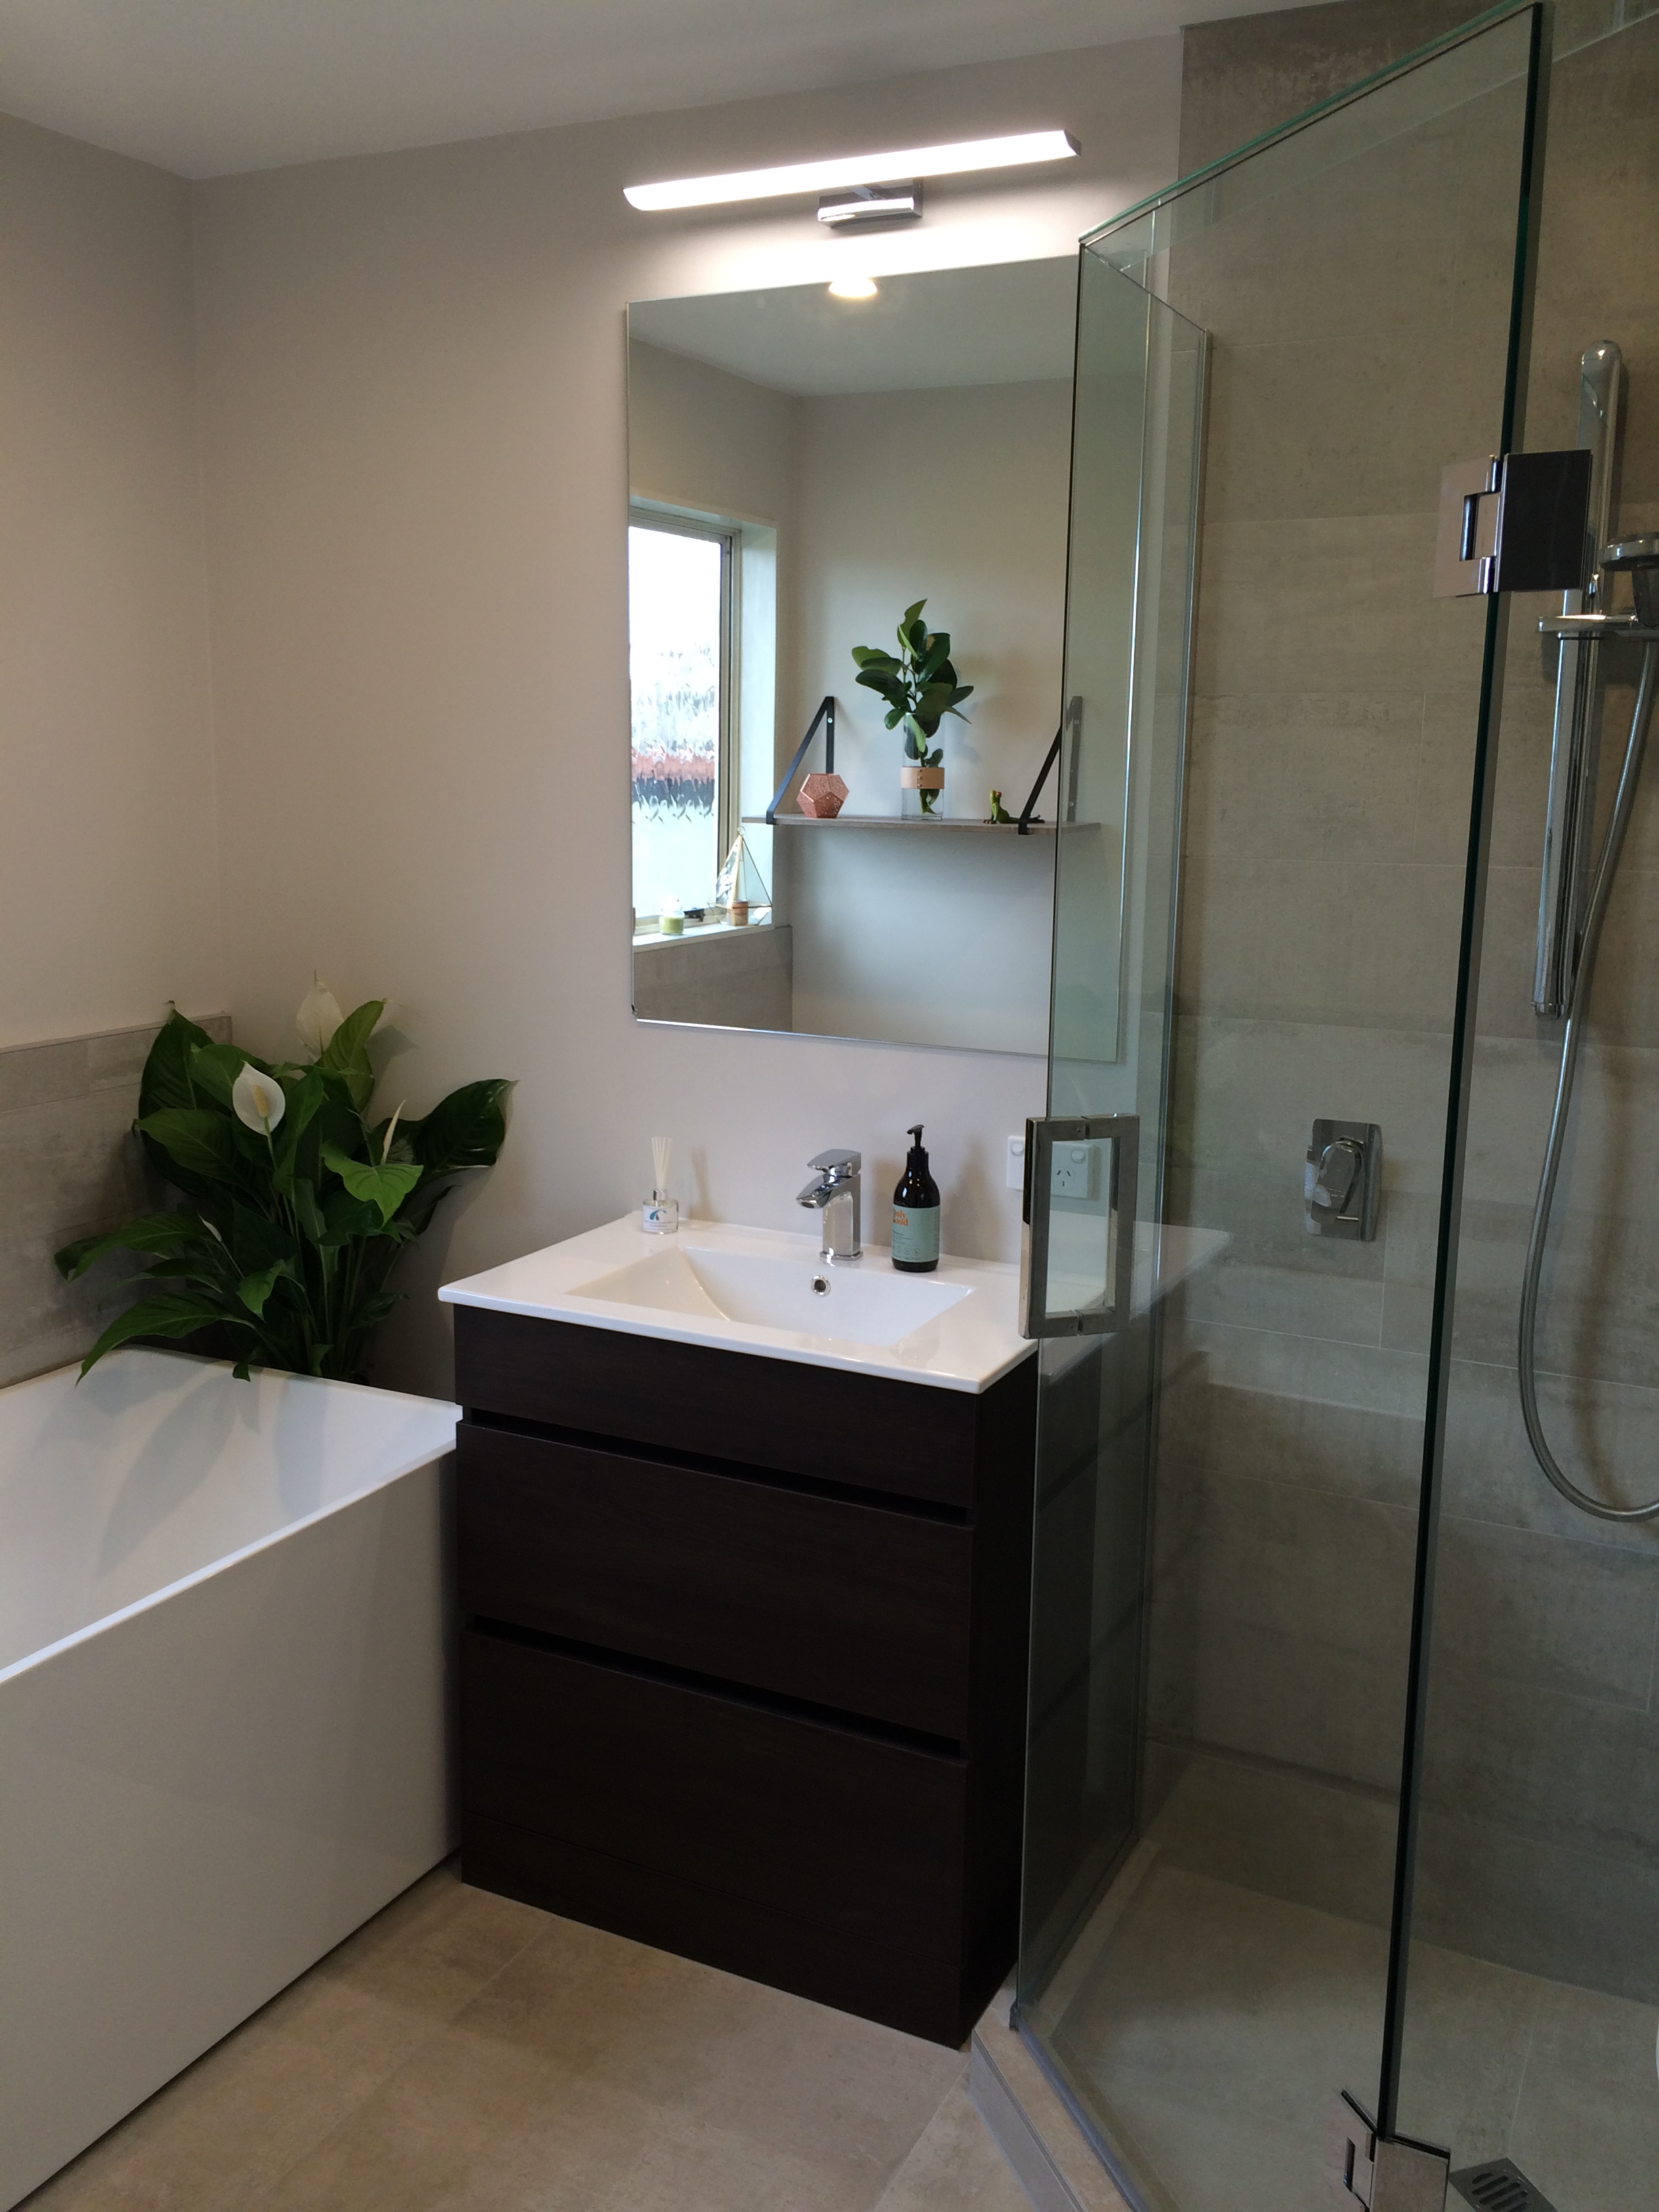 Three Bathrooms and a toilet in Forrest Hill Bathroom renovation photo